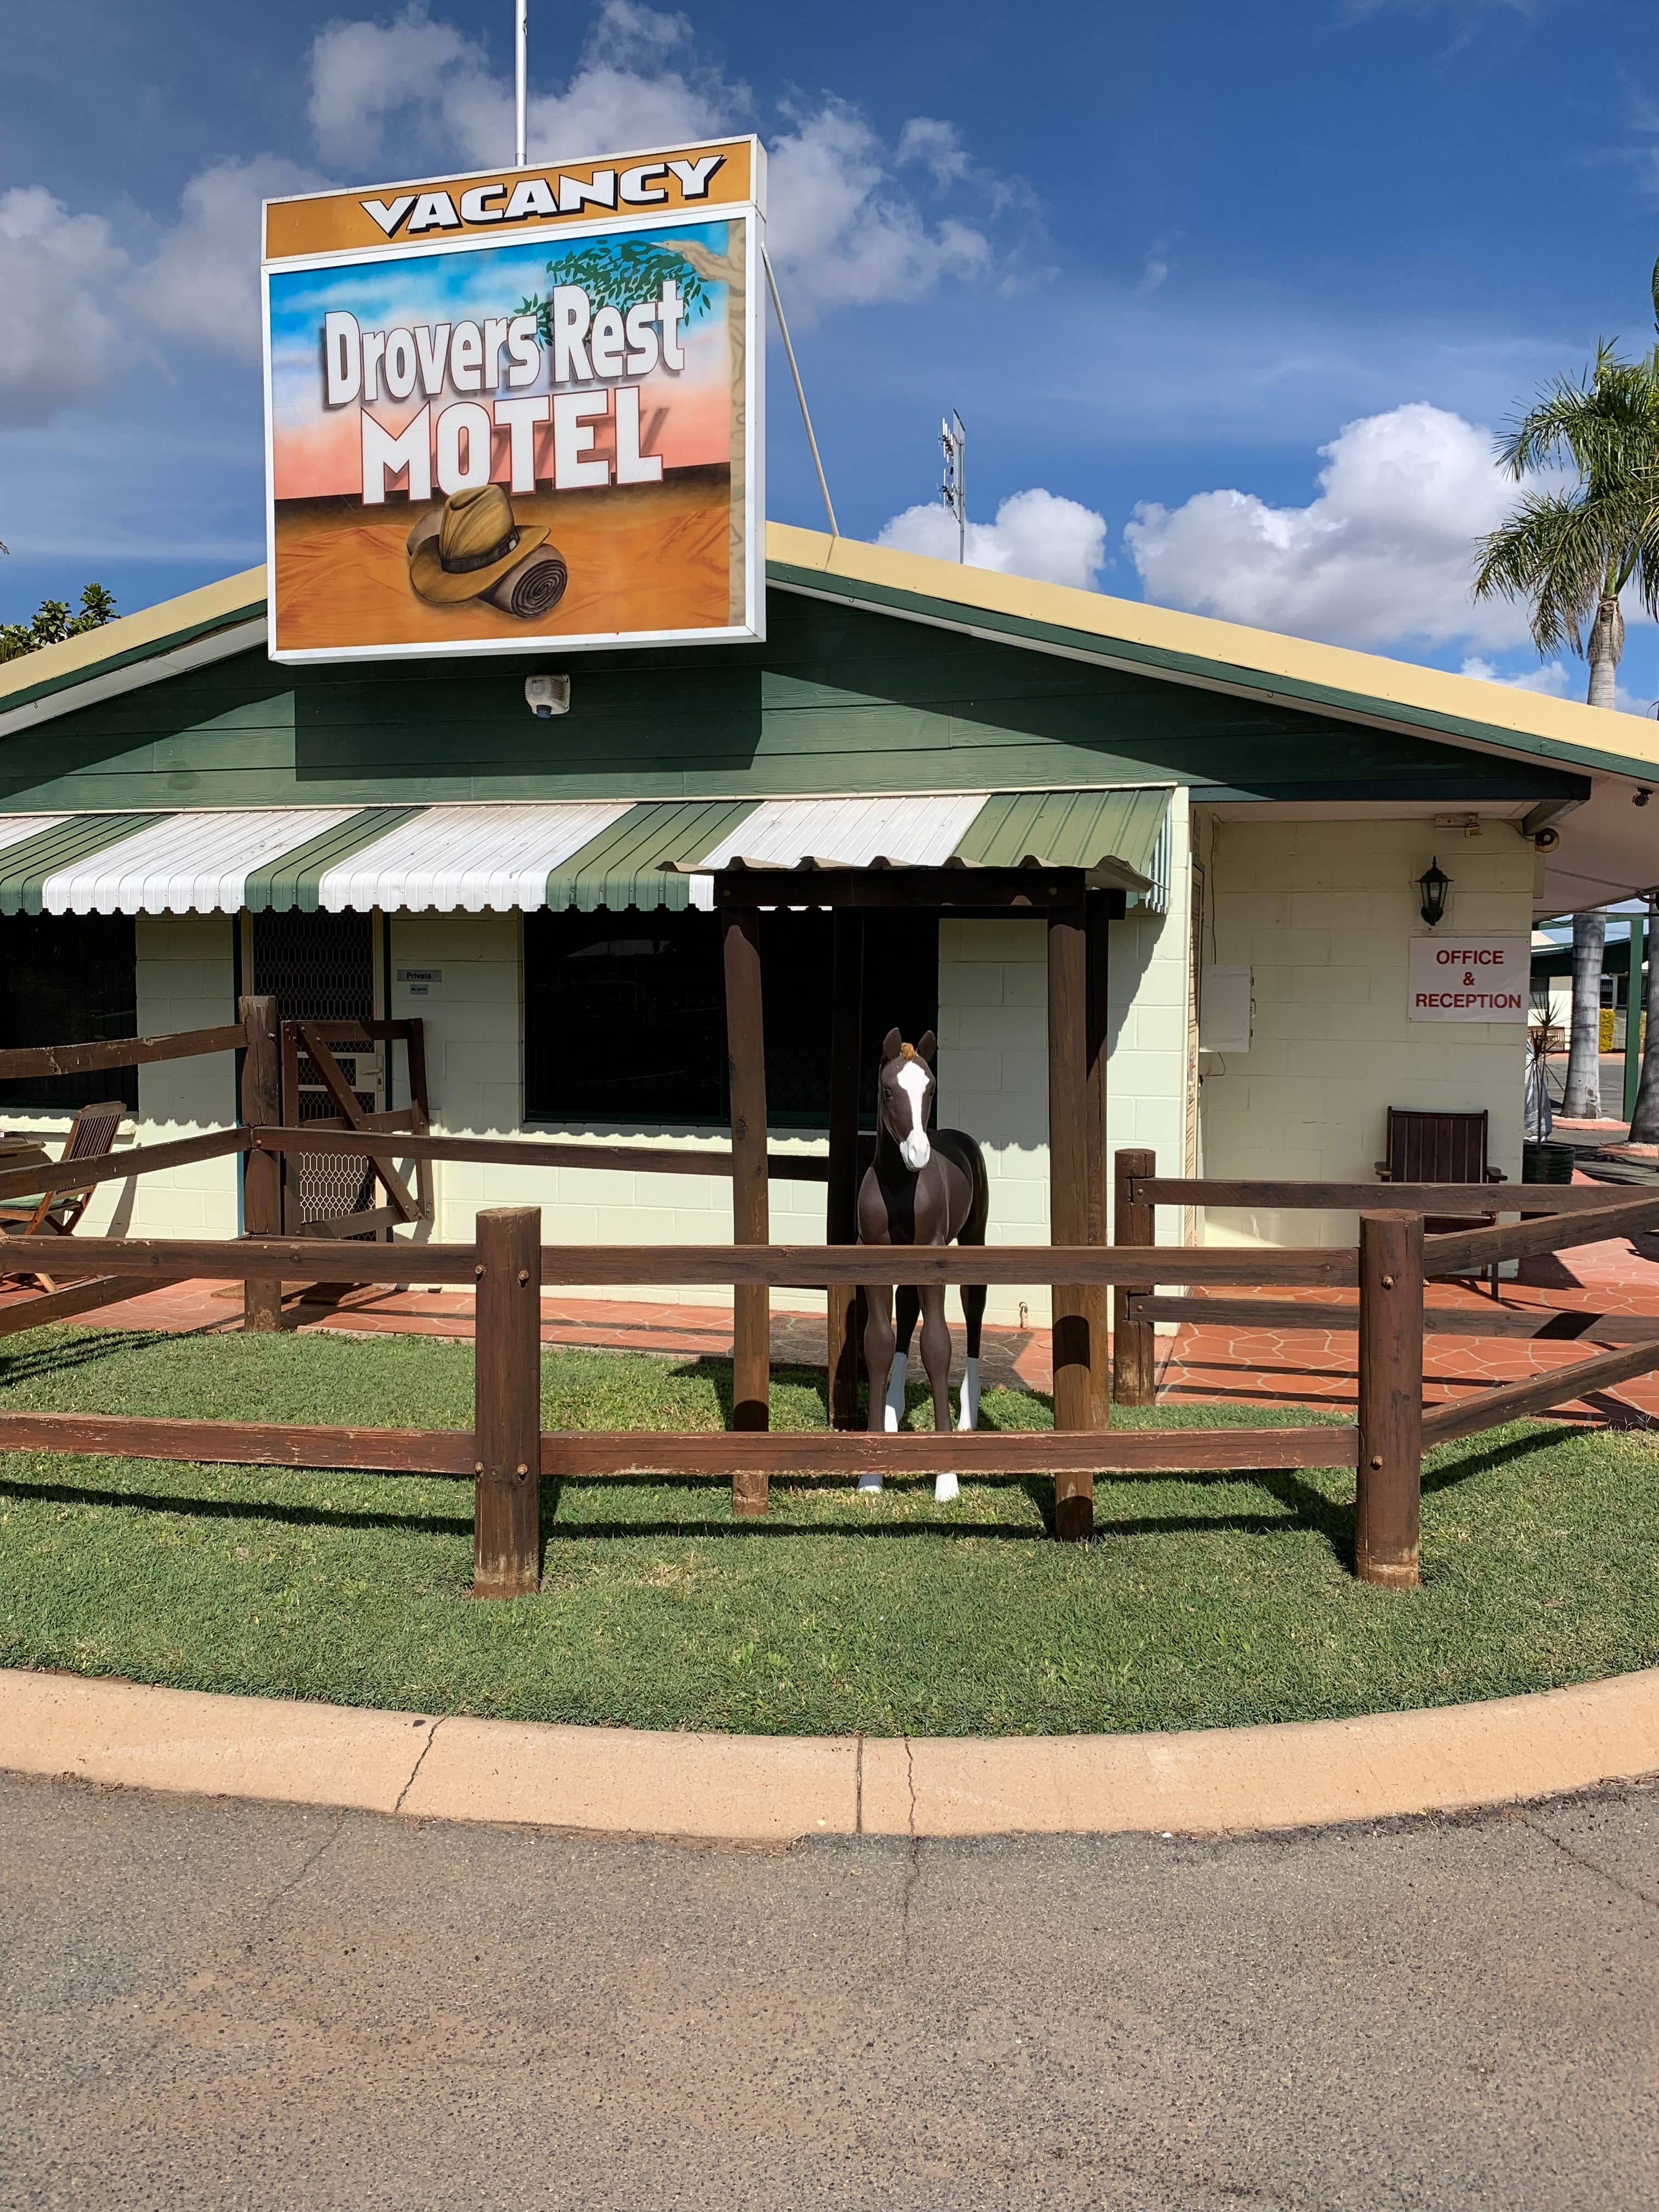 Drovers Rest Motel